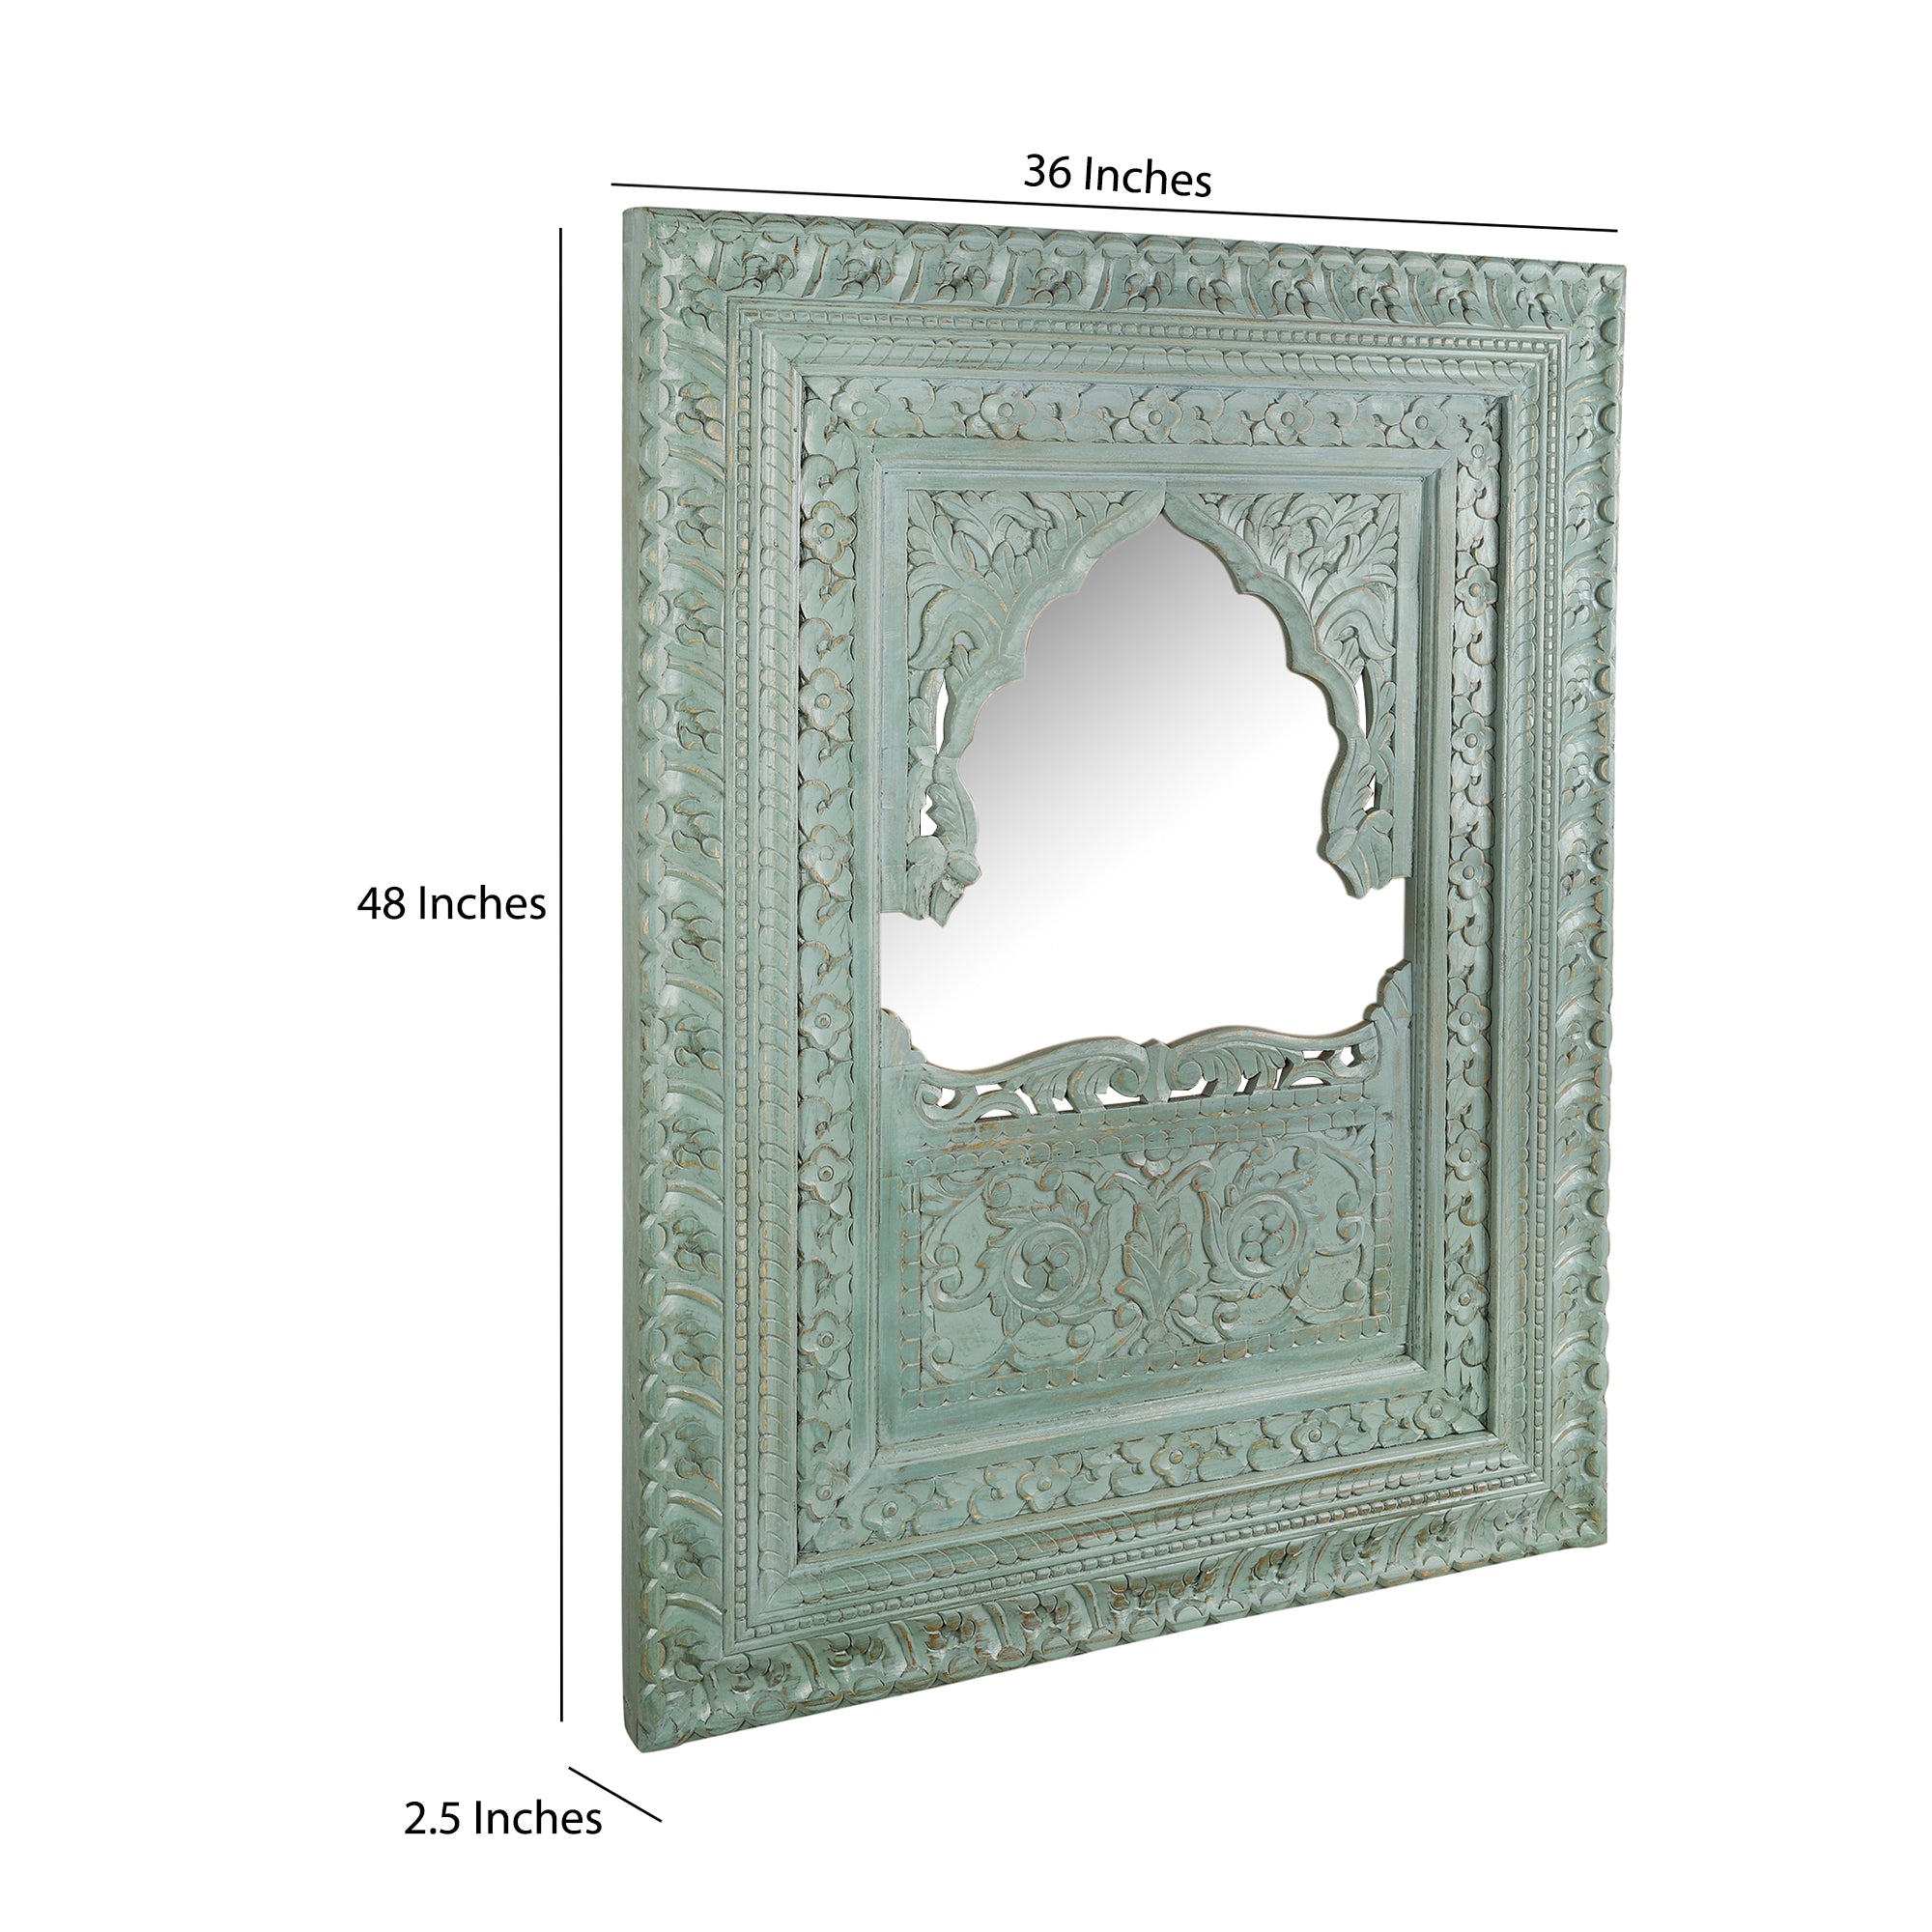 Falak Hand Carved Wall Mirror